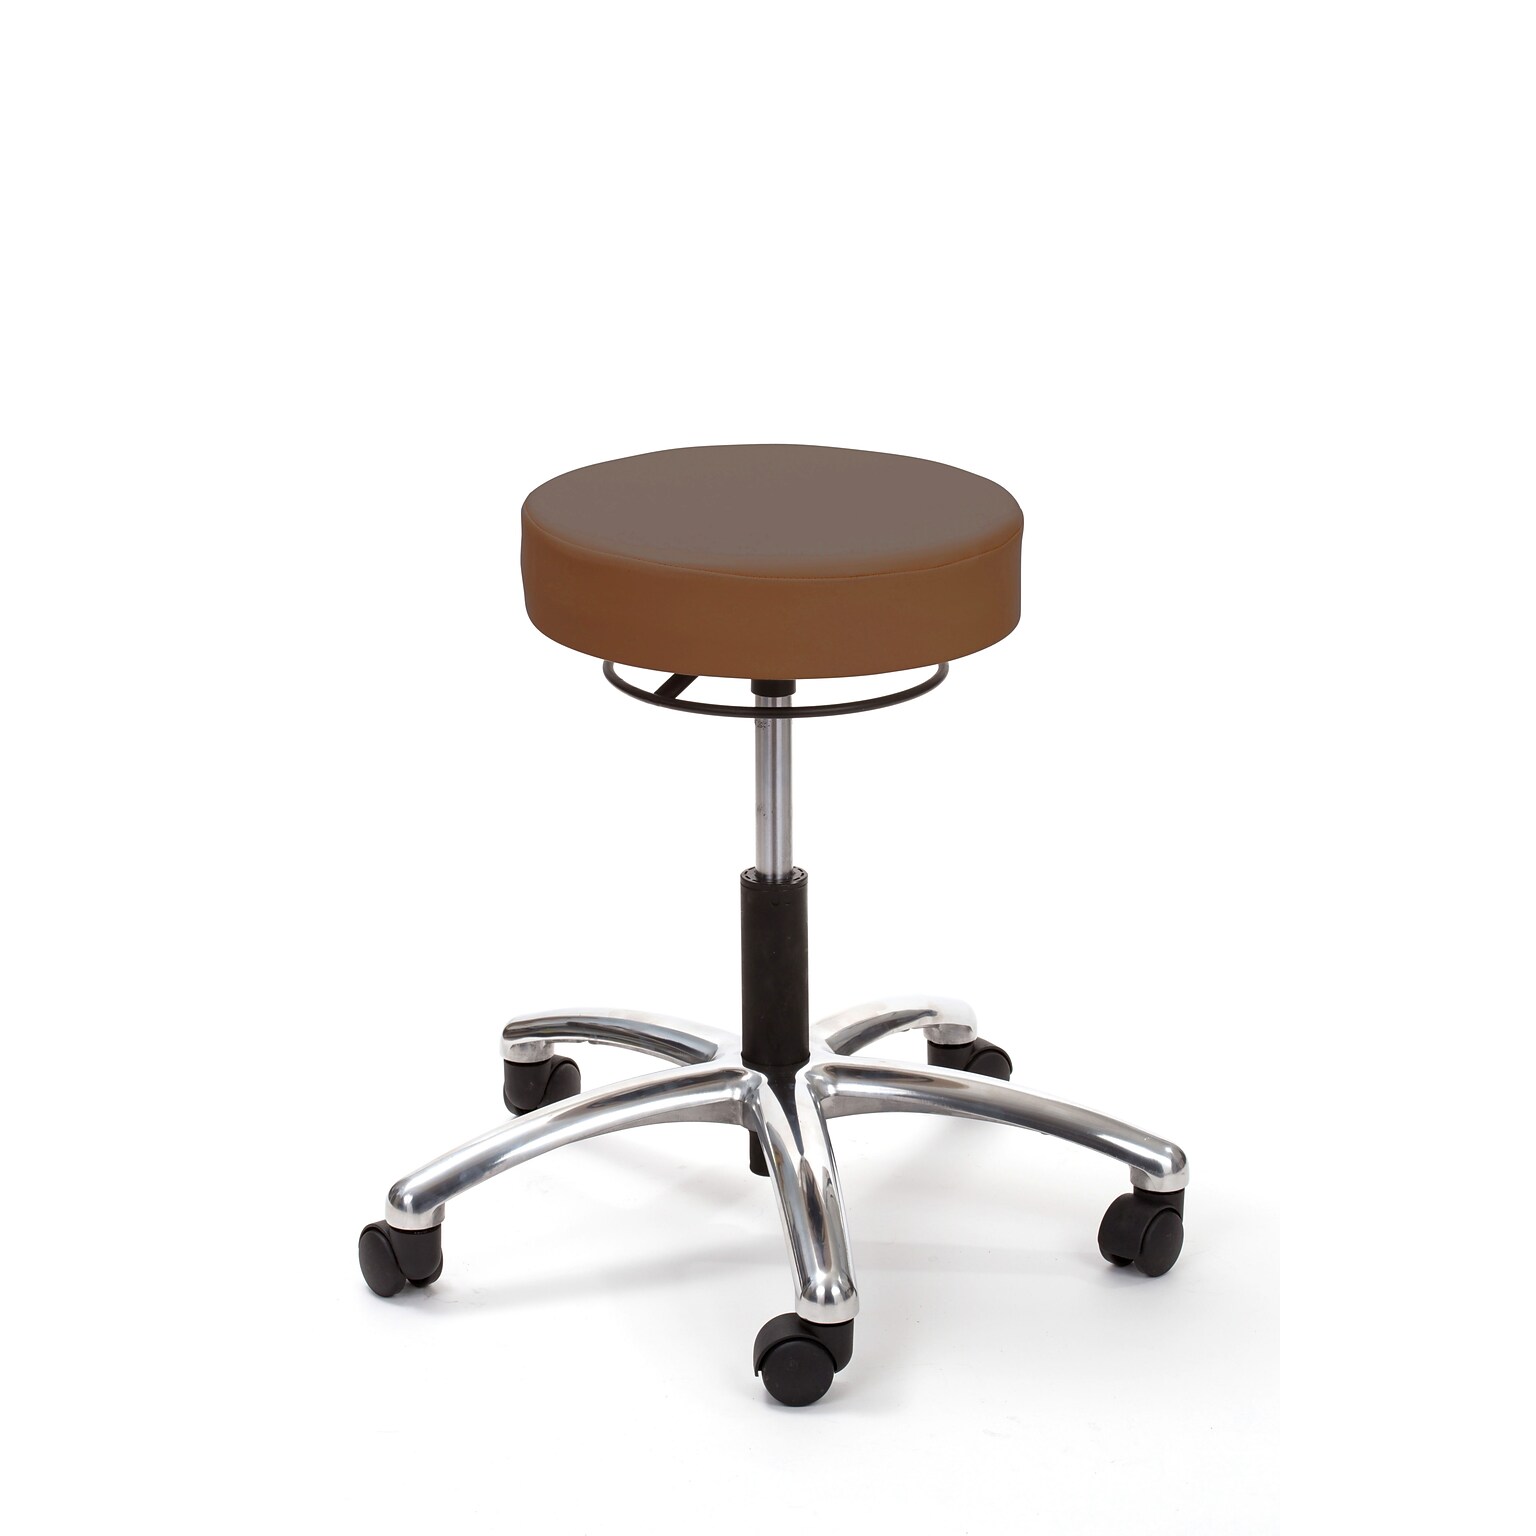 Brandt Airbuoy 17421RR 14 Pneumatic Stool with Ring Release, Chestnut Brown